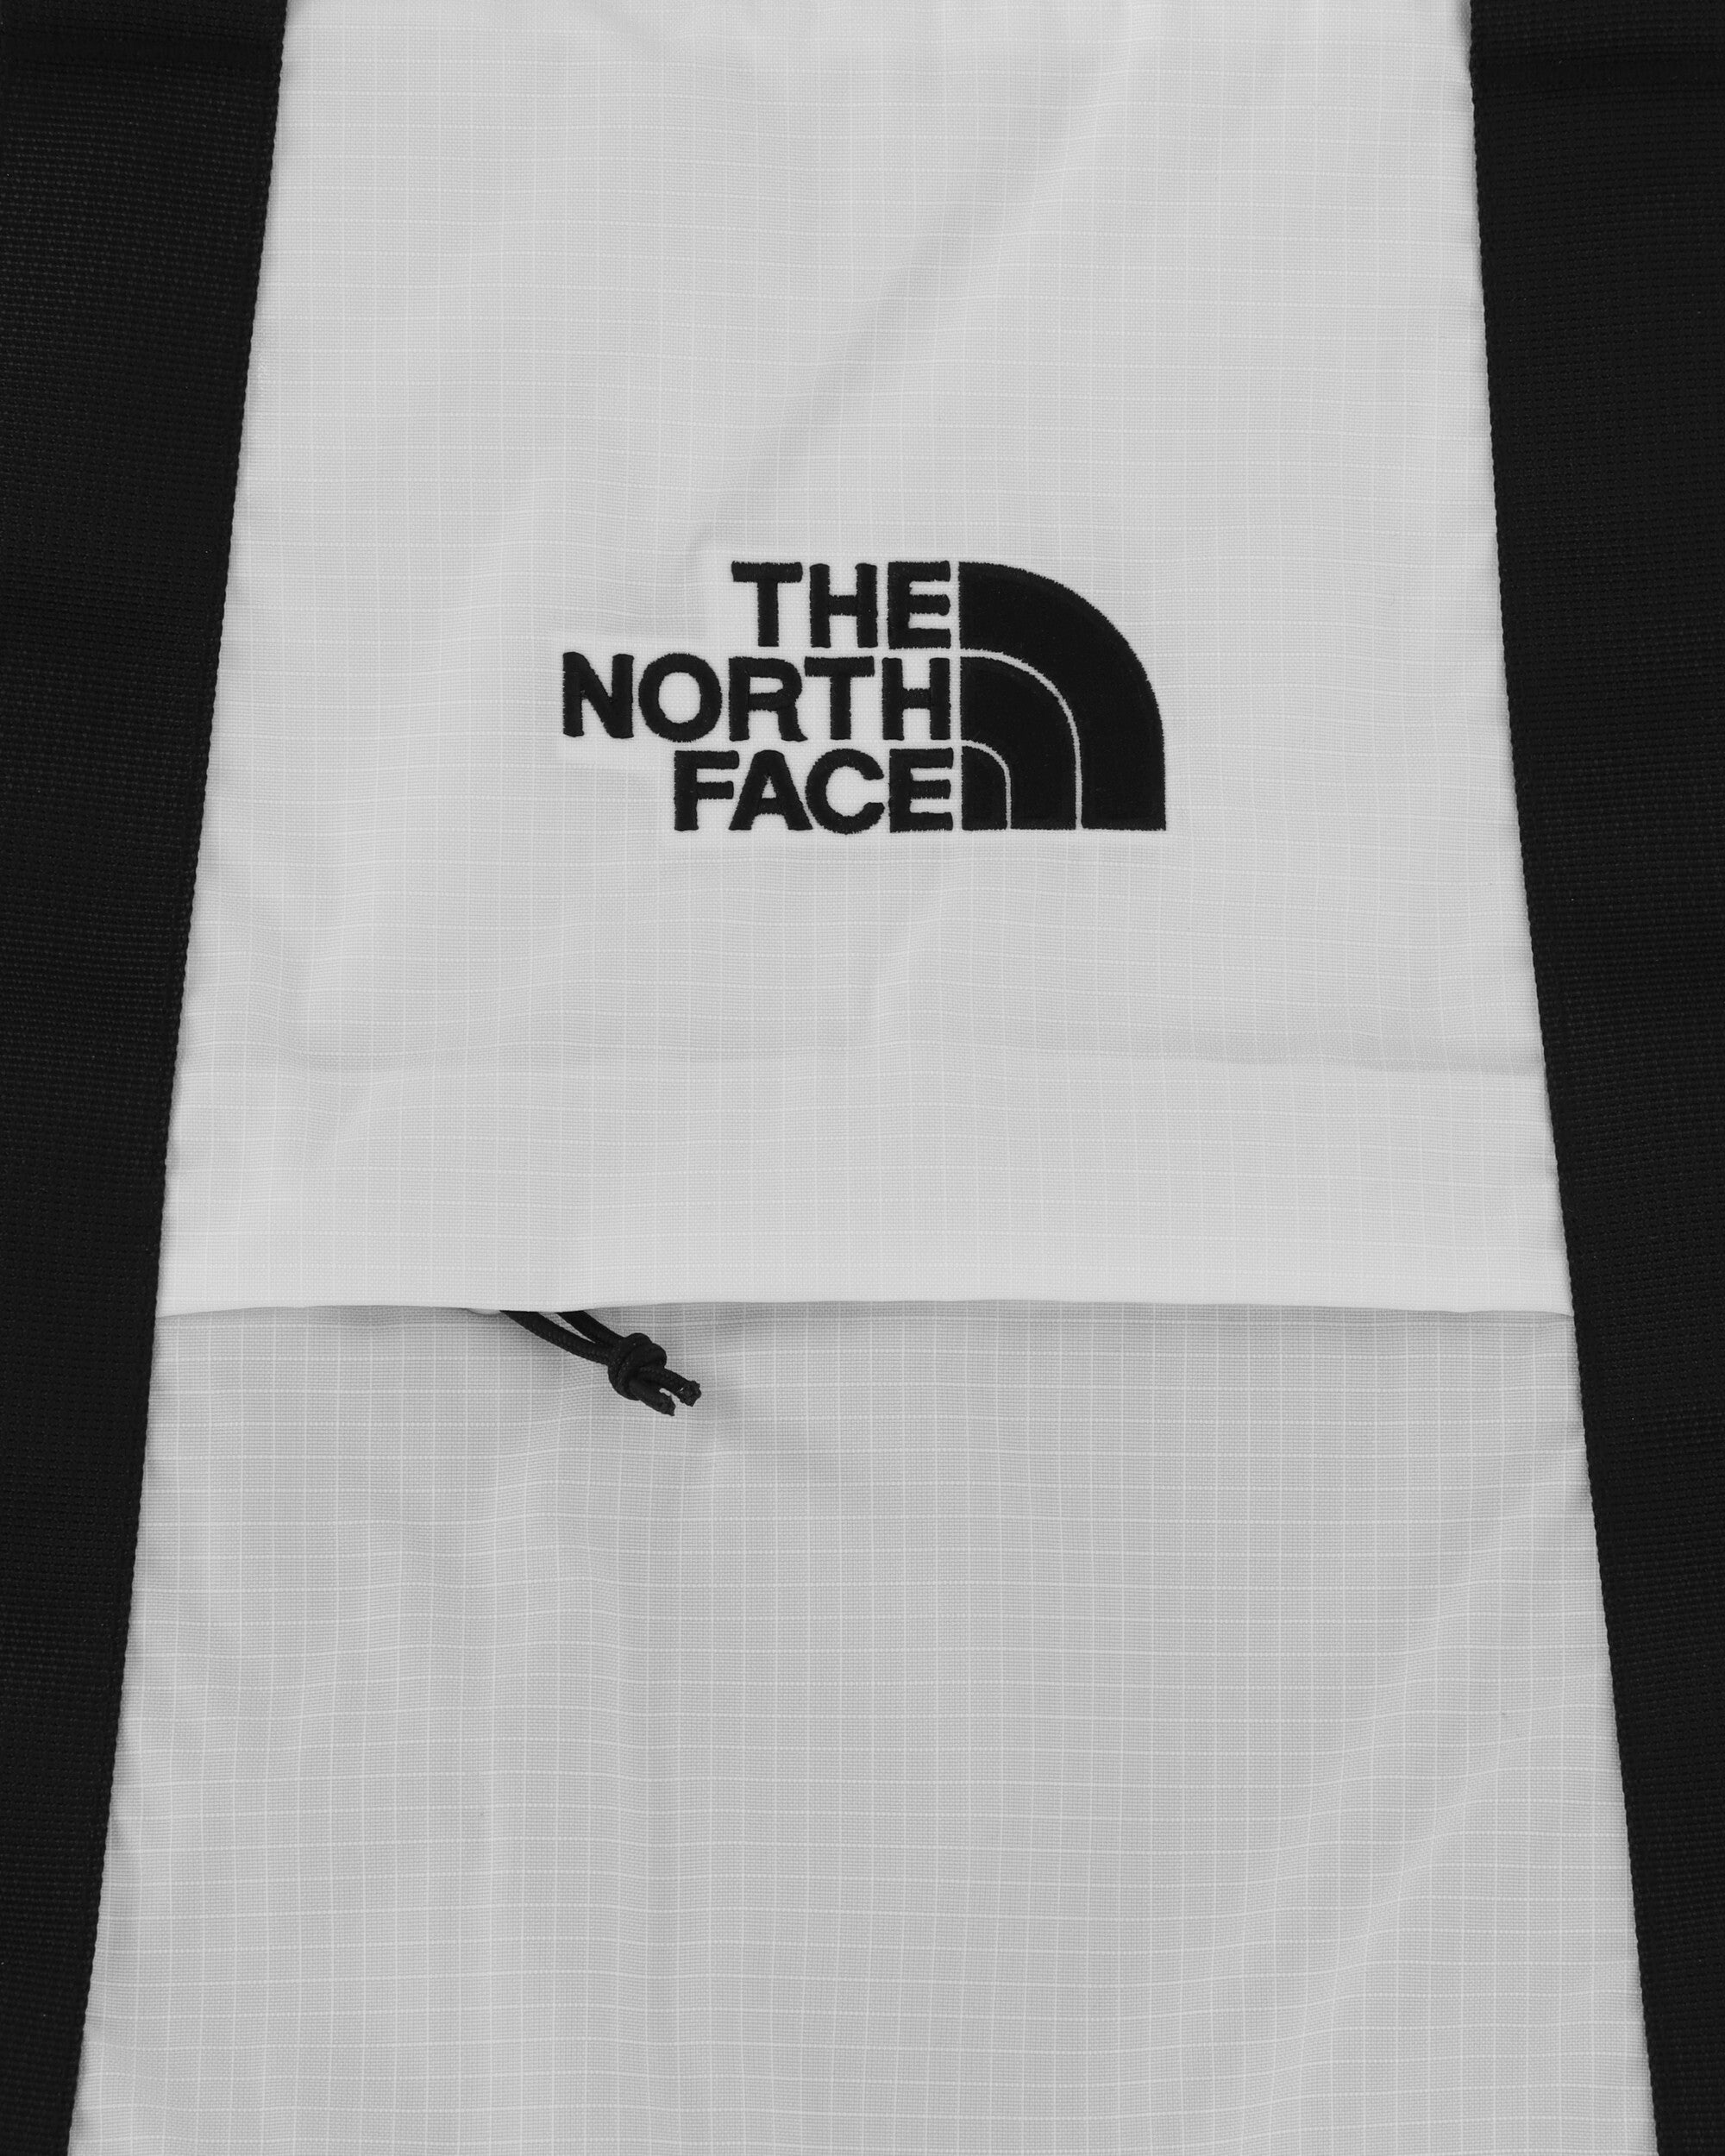 The North Face Borealis Tote Gardenia White/Tnf Black  Bags and Backpacks Tote Bags NF0A52SV Q4C1